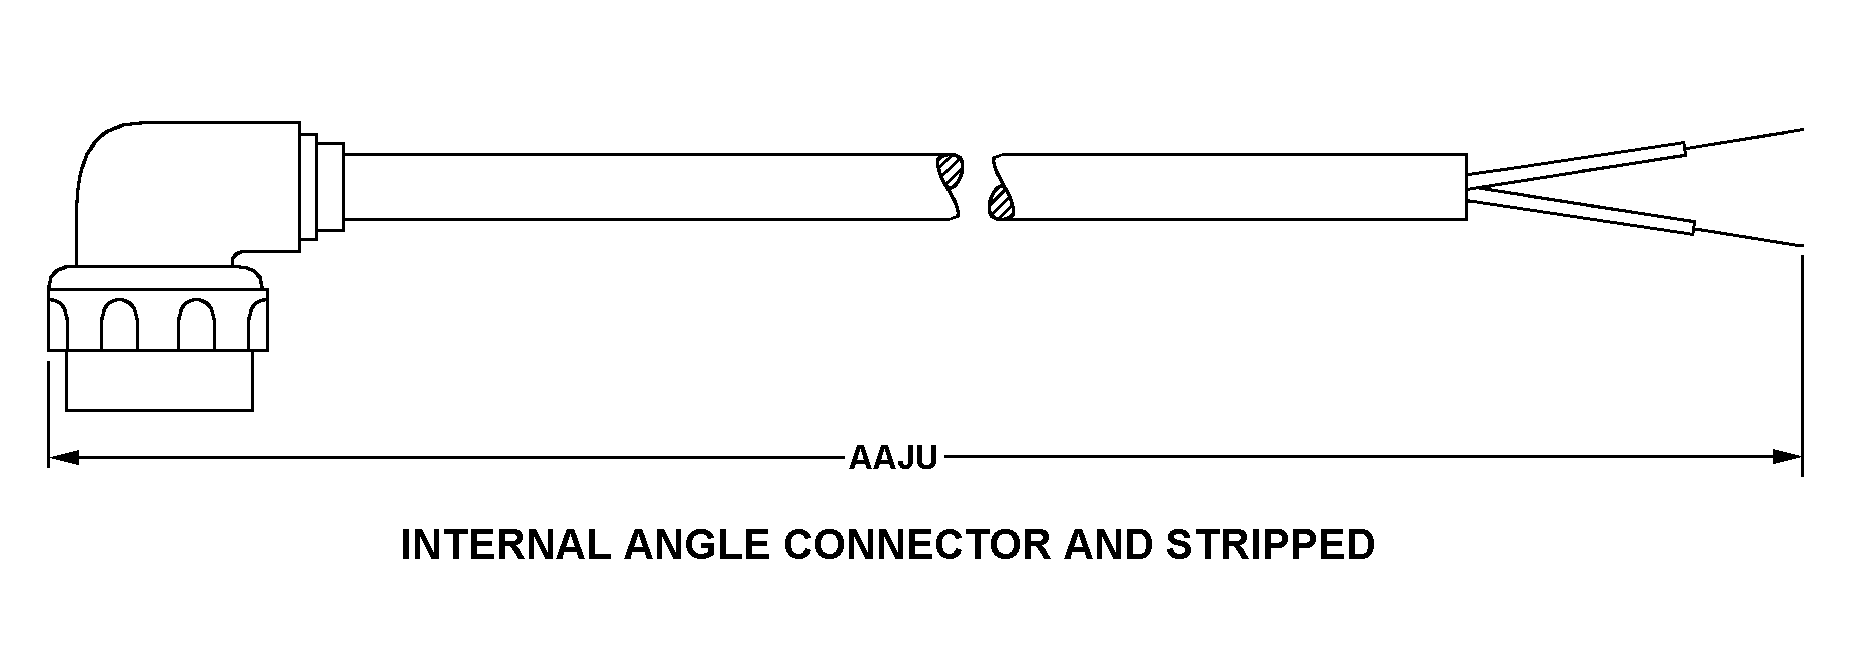 INTERNAL ANGLE CONNECTOR AND STRIPPED style nsn 6150-01-360-9819